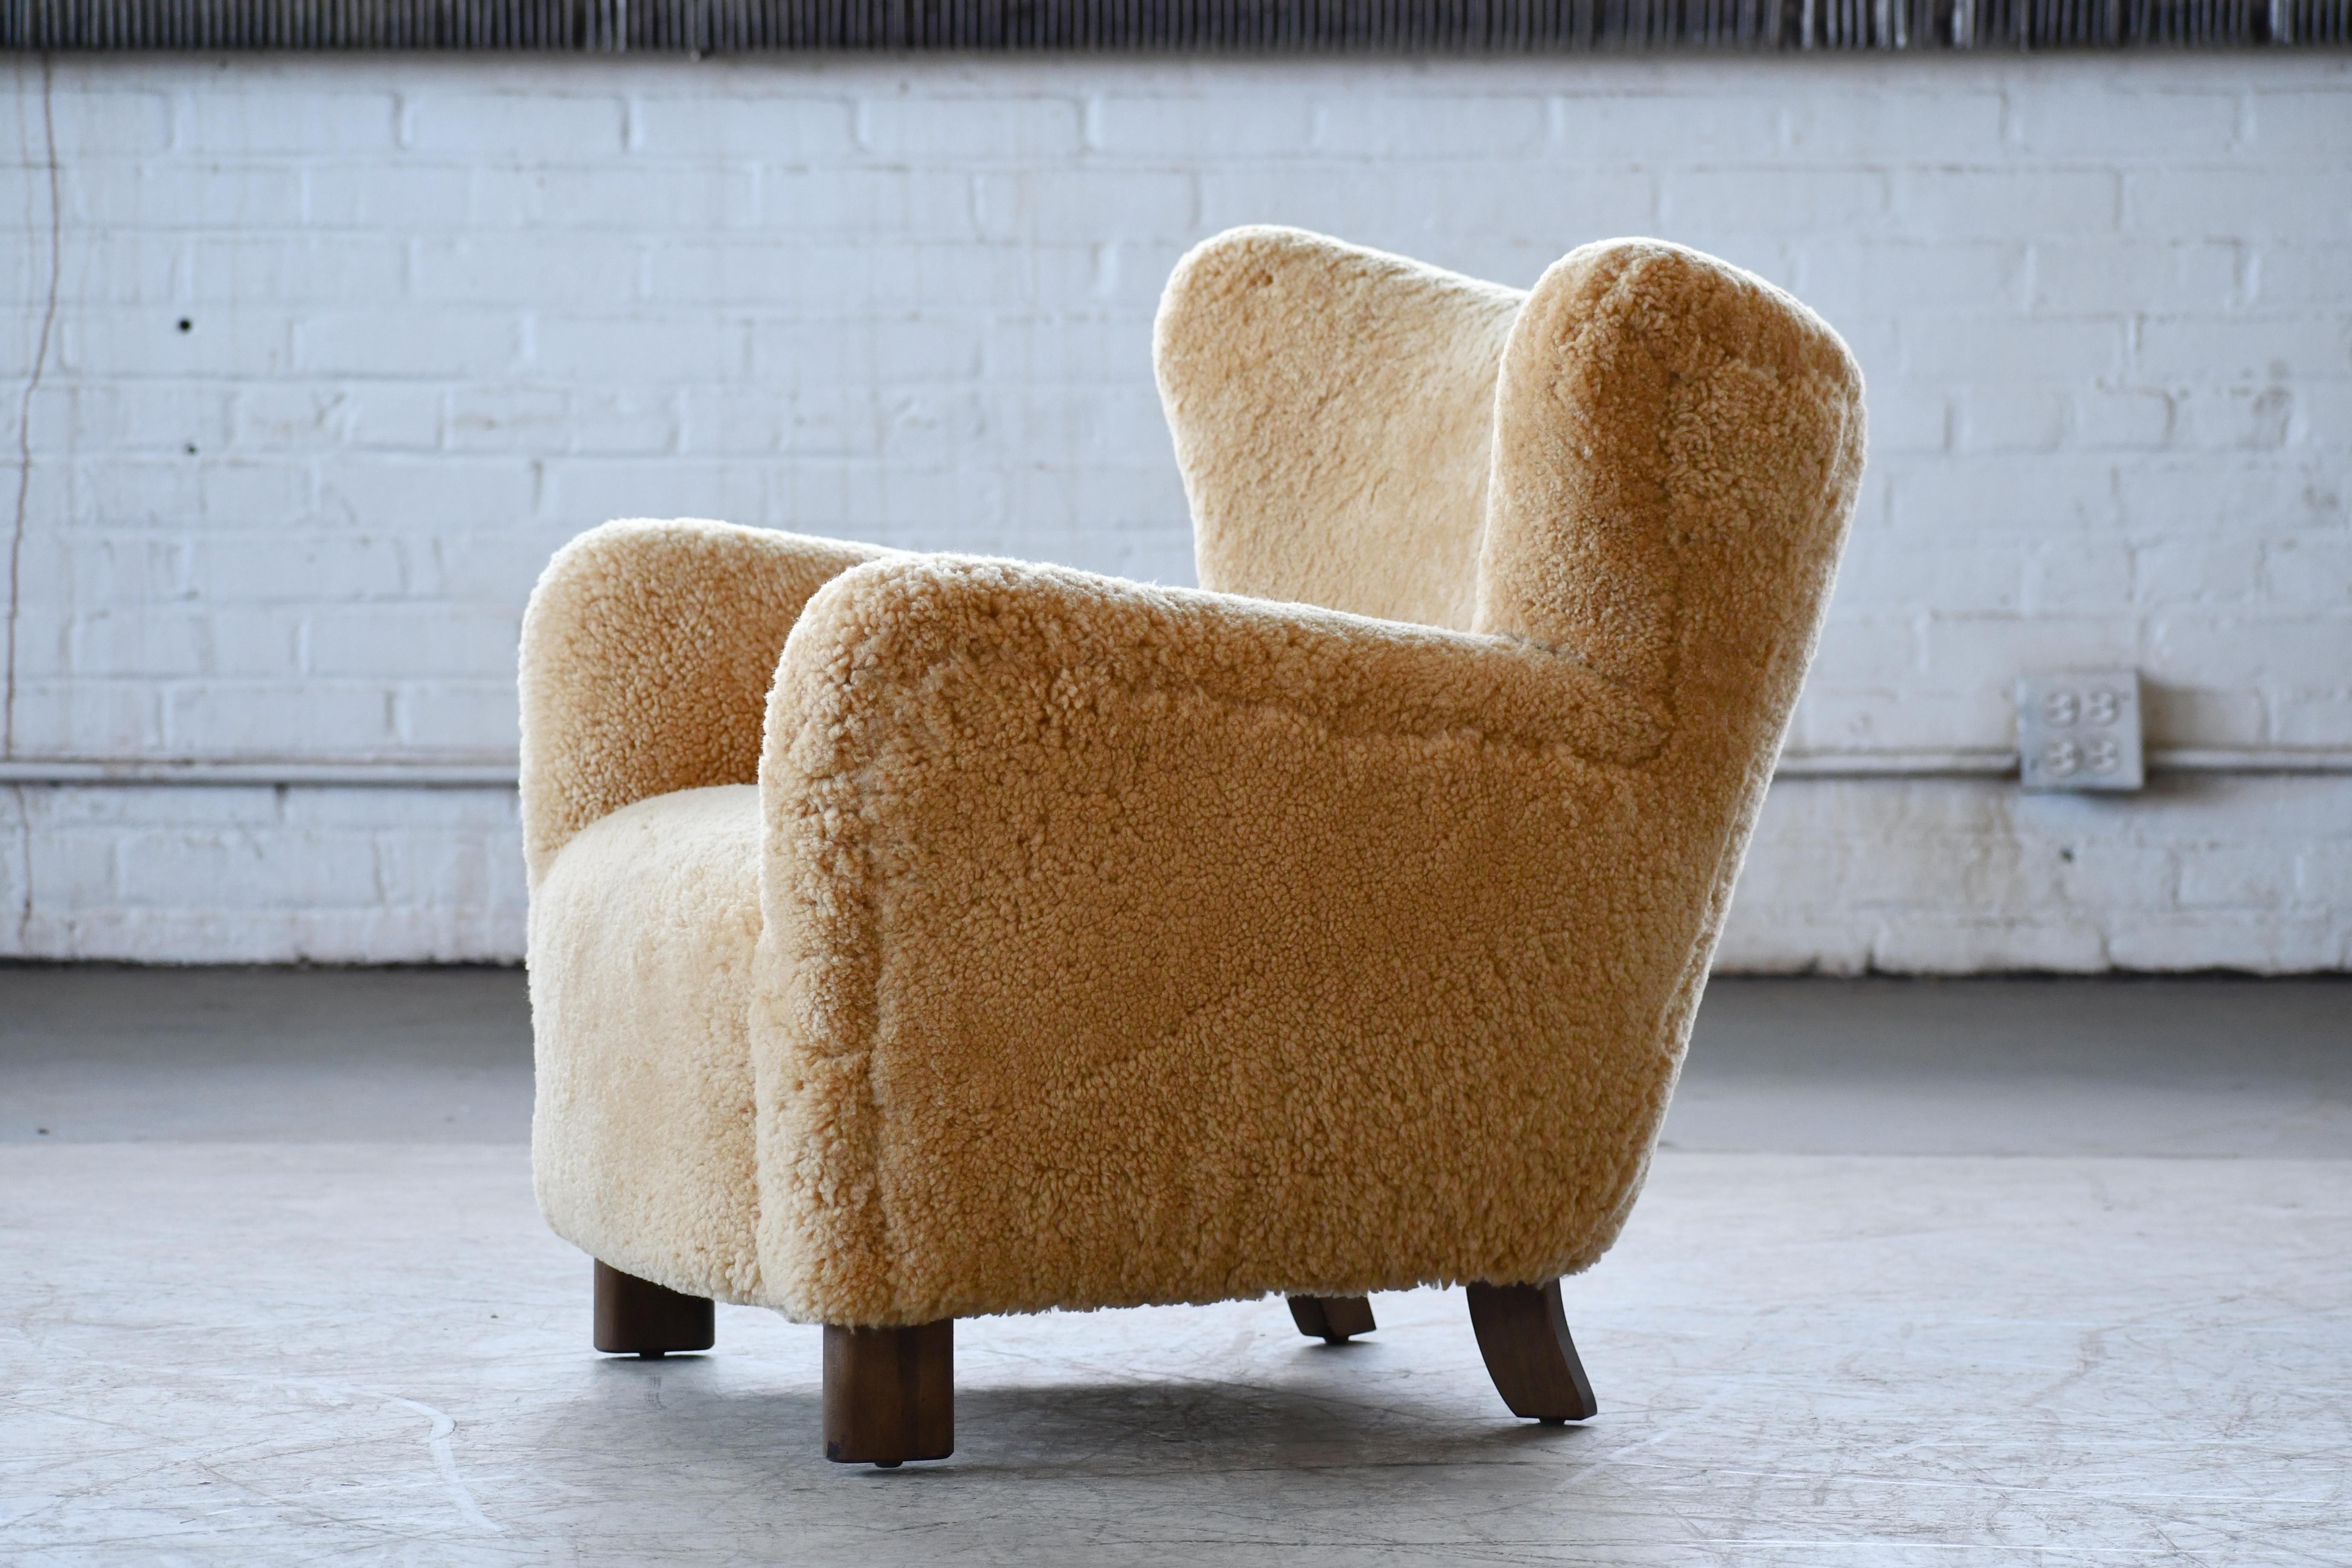 Custom Made 1940's Style Lounge Chair Upholstered in Amber Color Shearling In New Condition For Sale In Bridgeport, CT